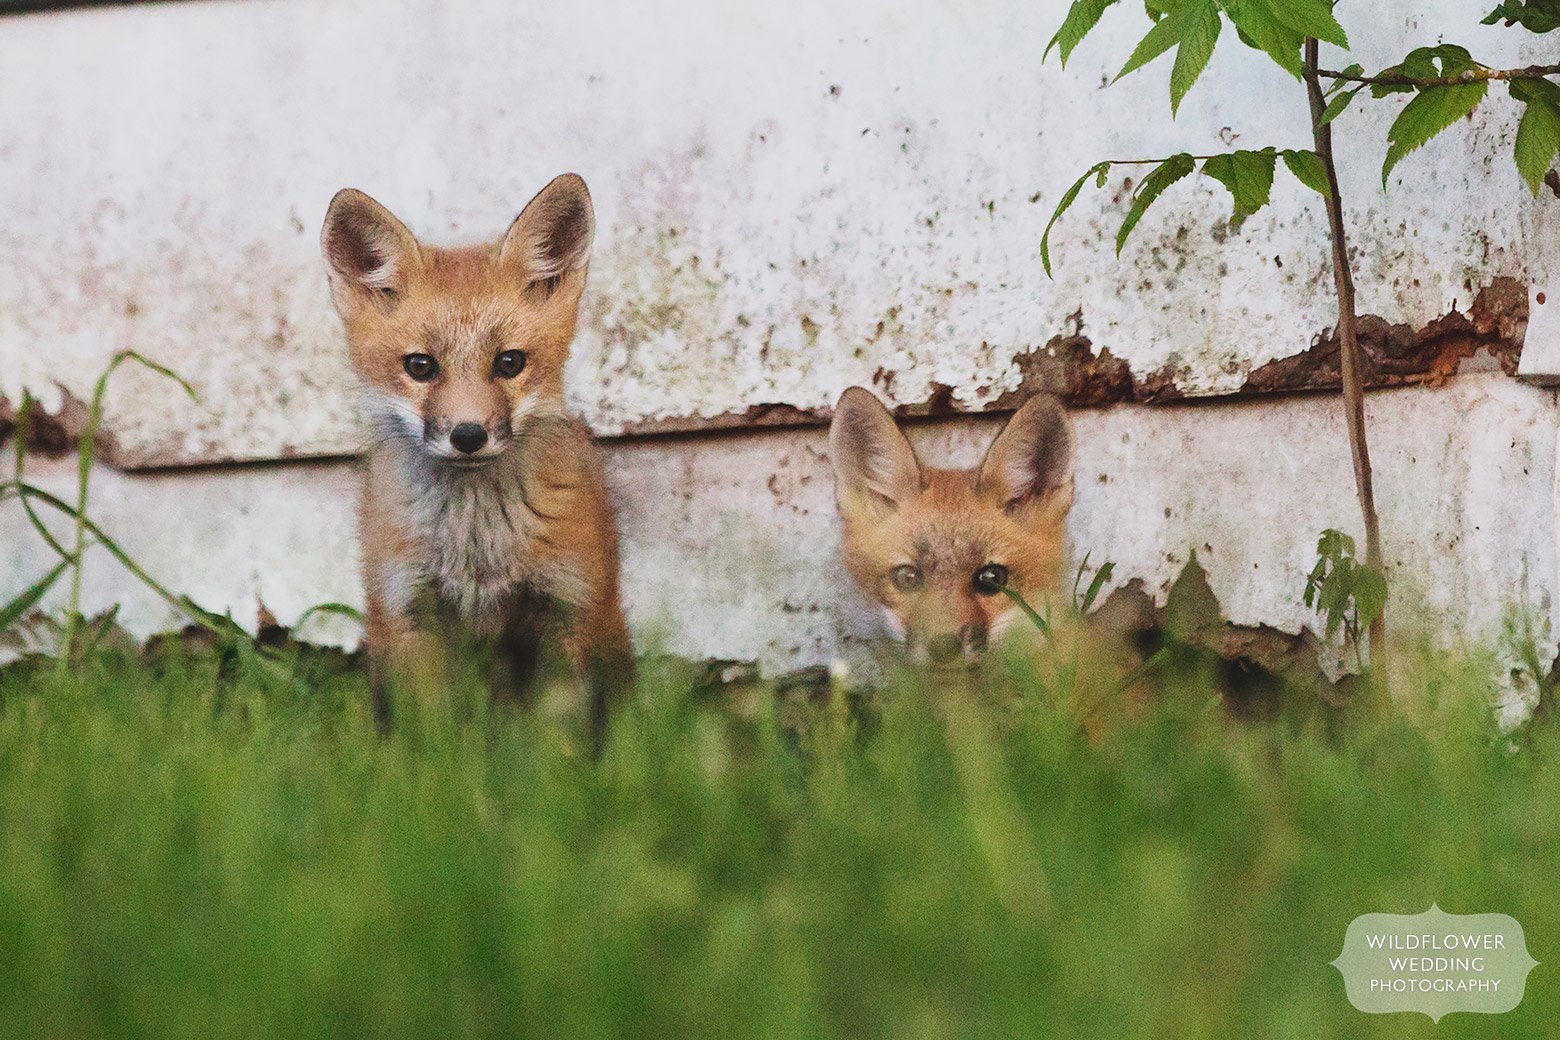 Two red fox kits come out from under their abandoned house burrow in mid-MO.